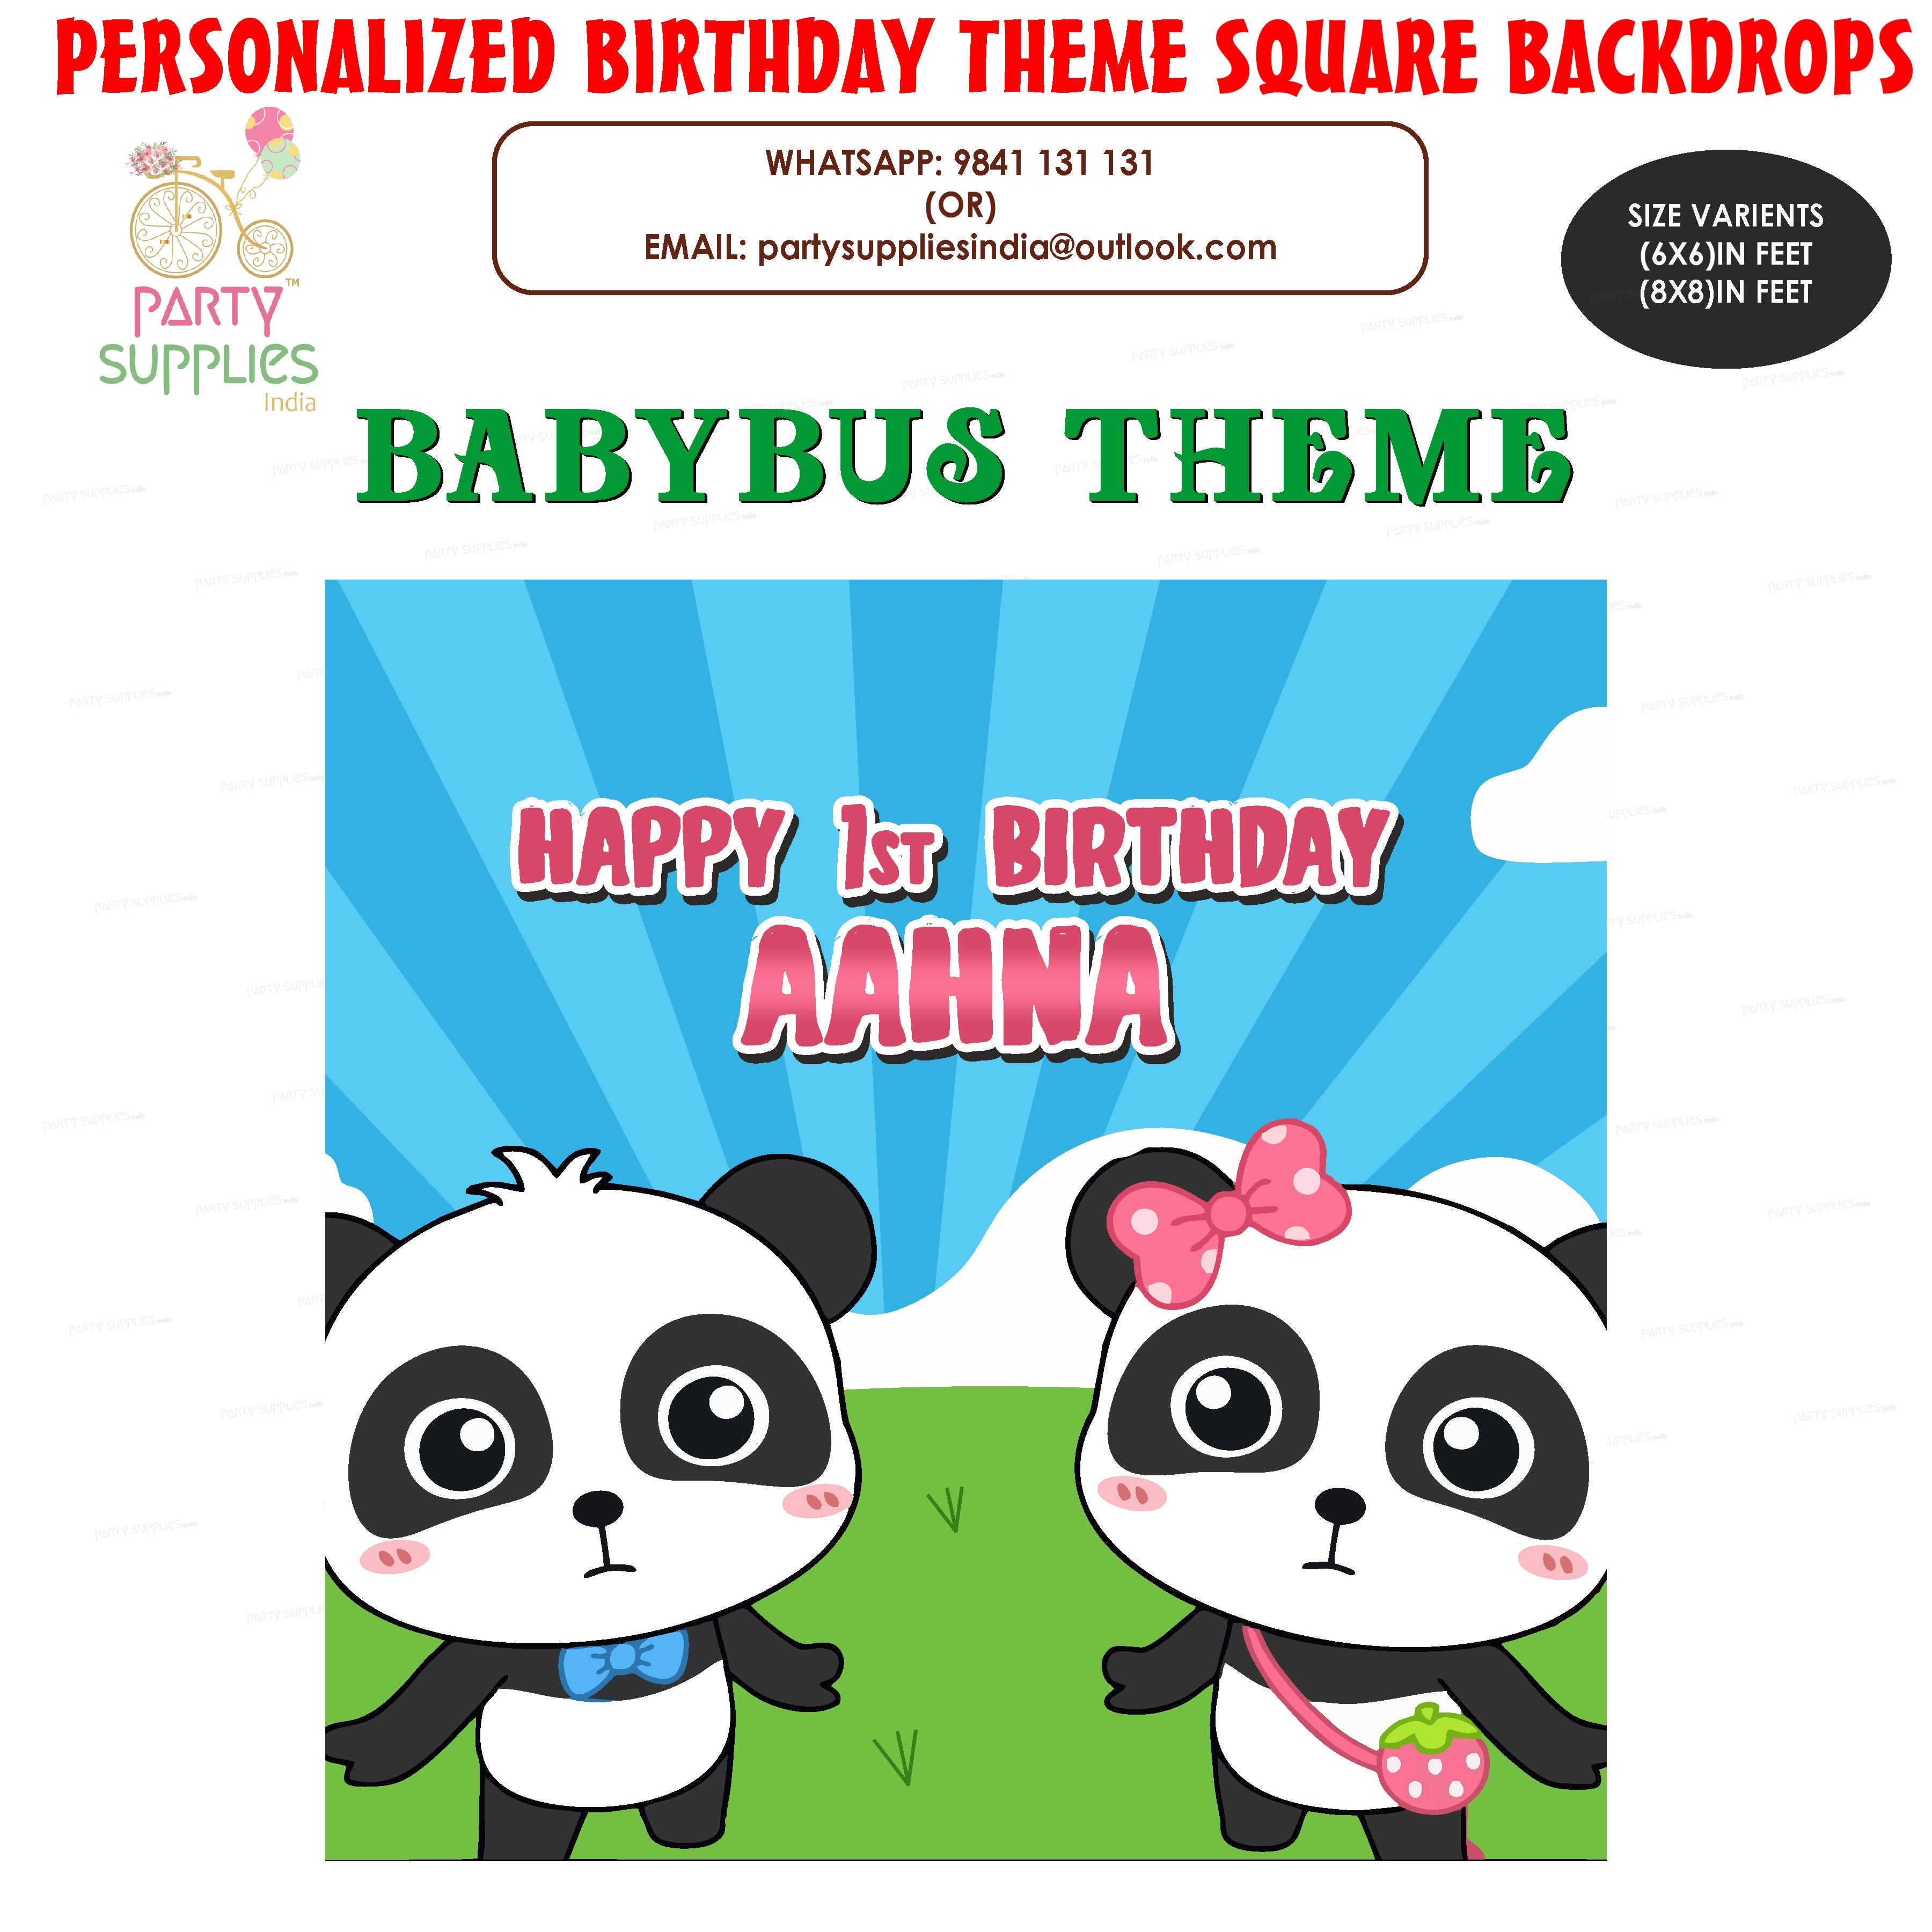 PSI Baby Bus Theme  Customized Square Backdrop